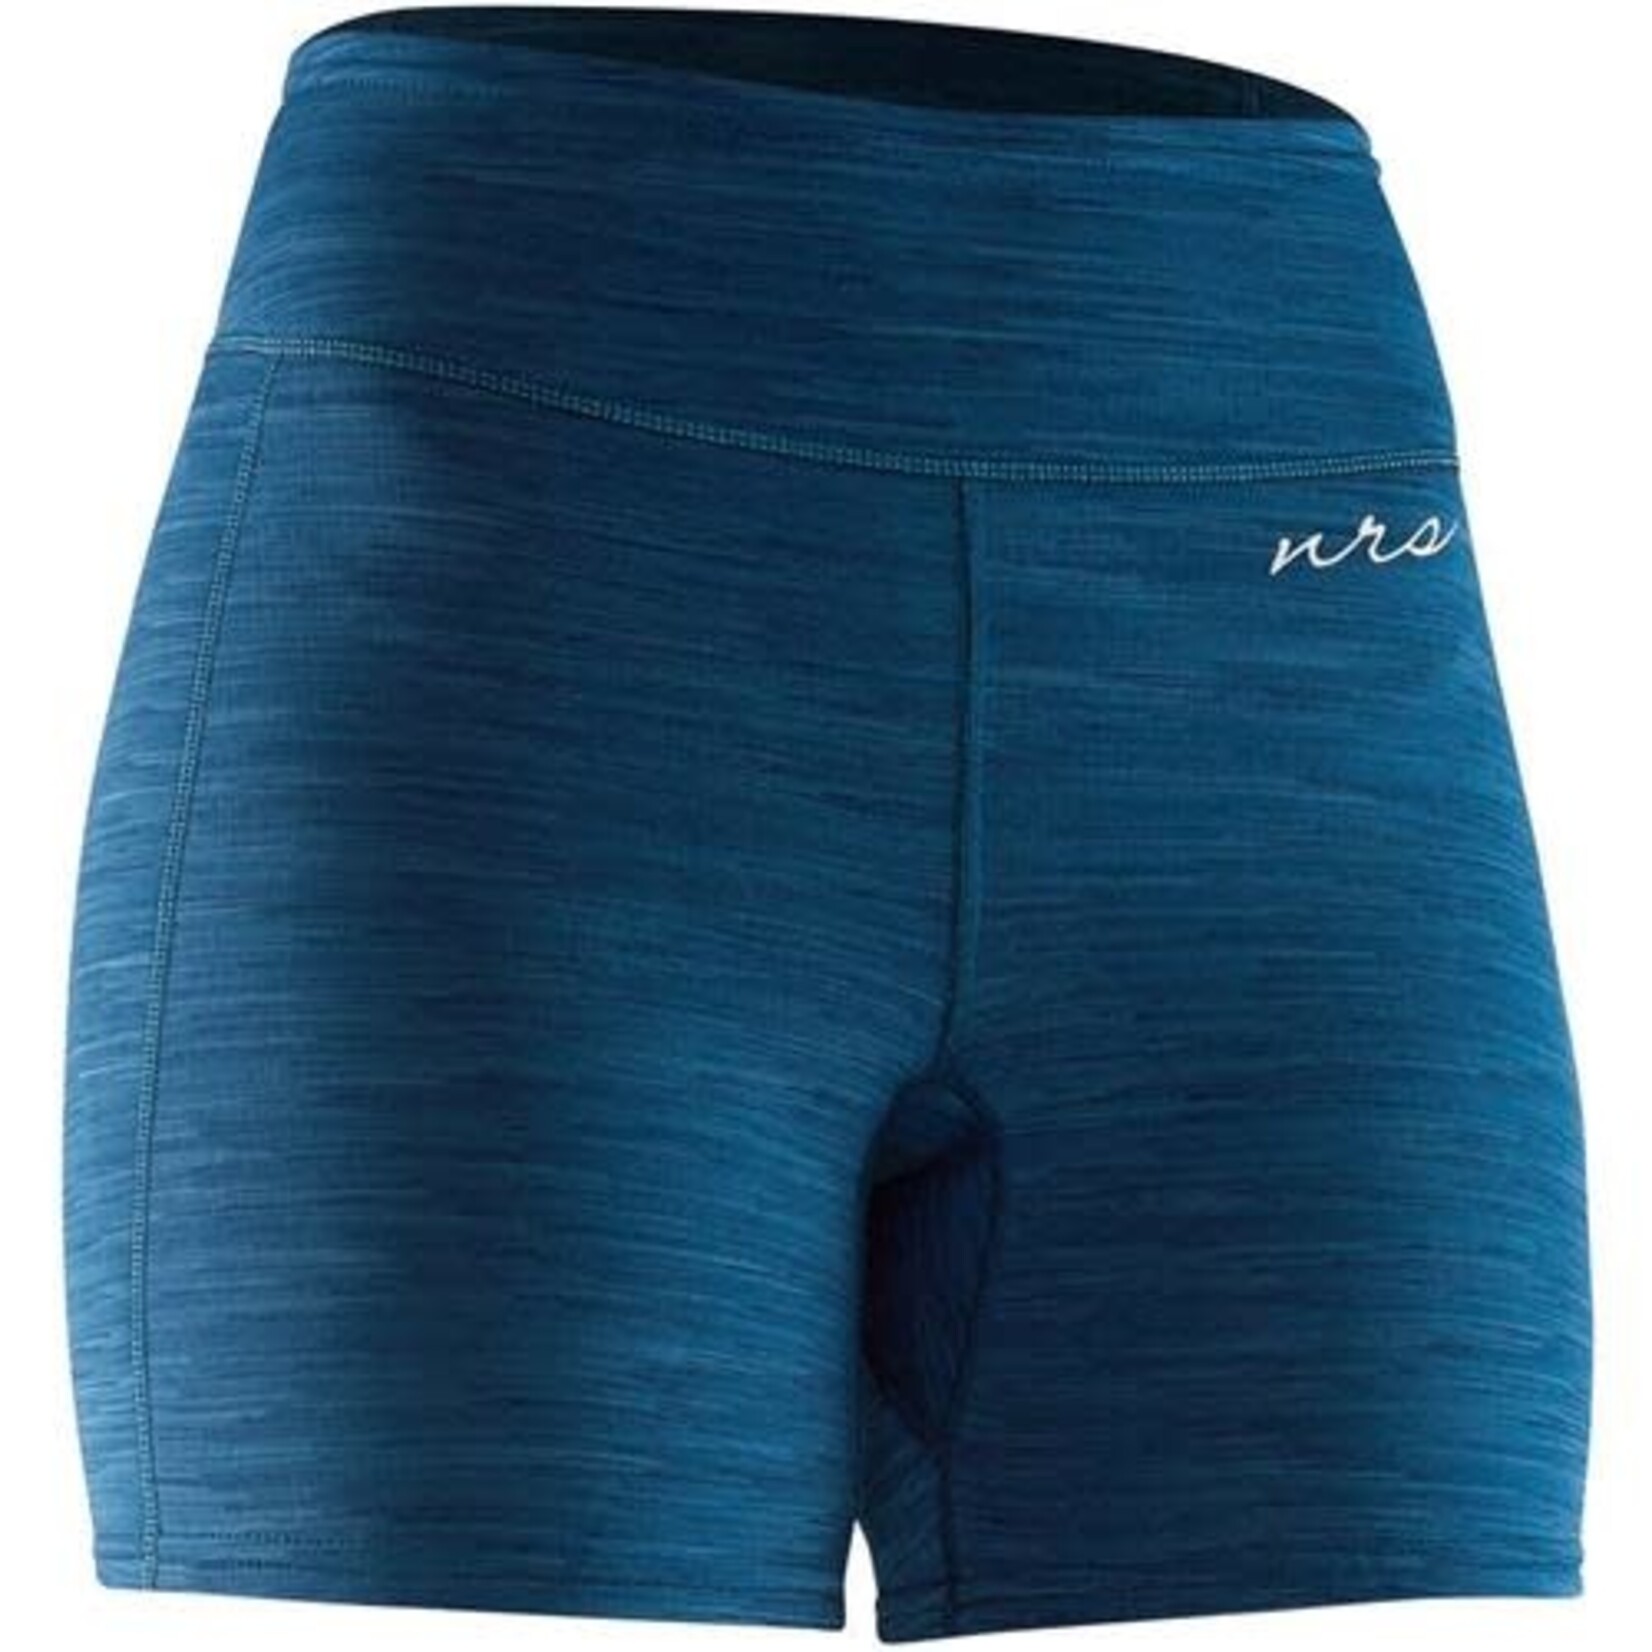 NRS Shorts Hydroskin 0.5 pour femmes